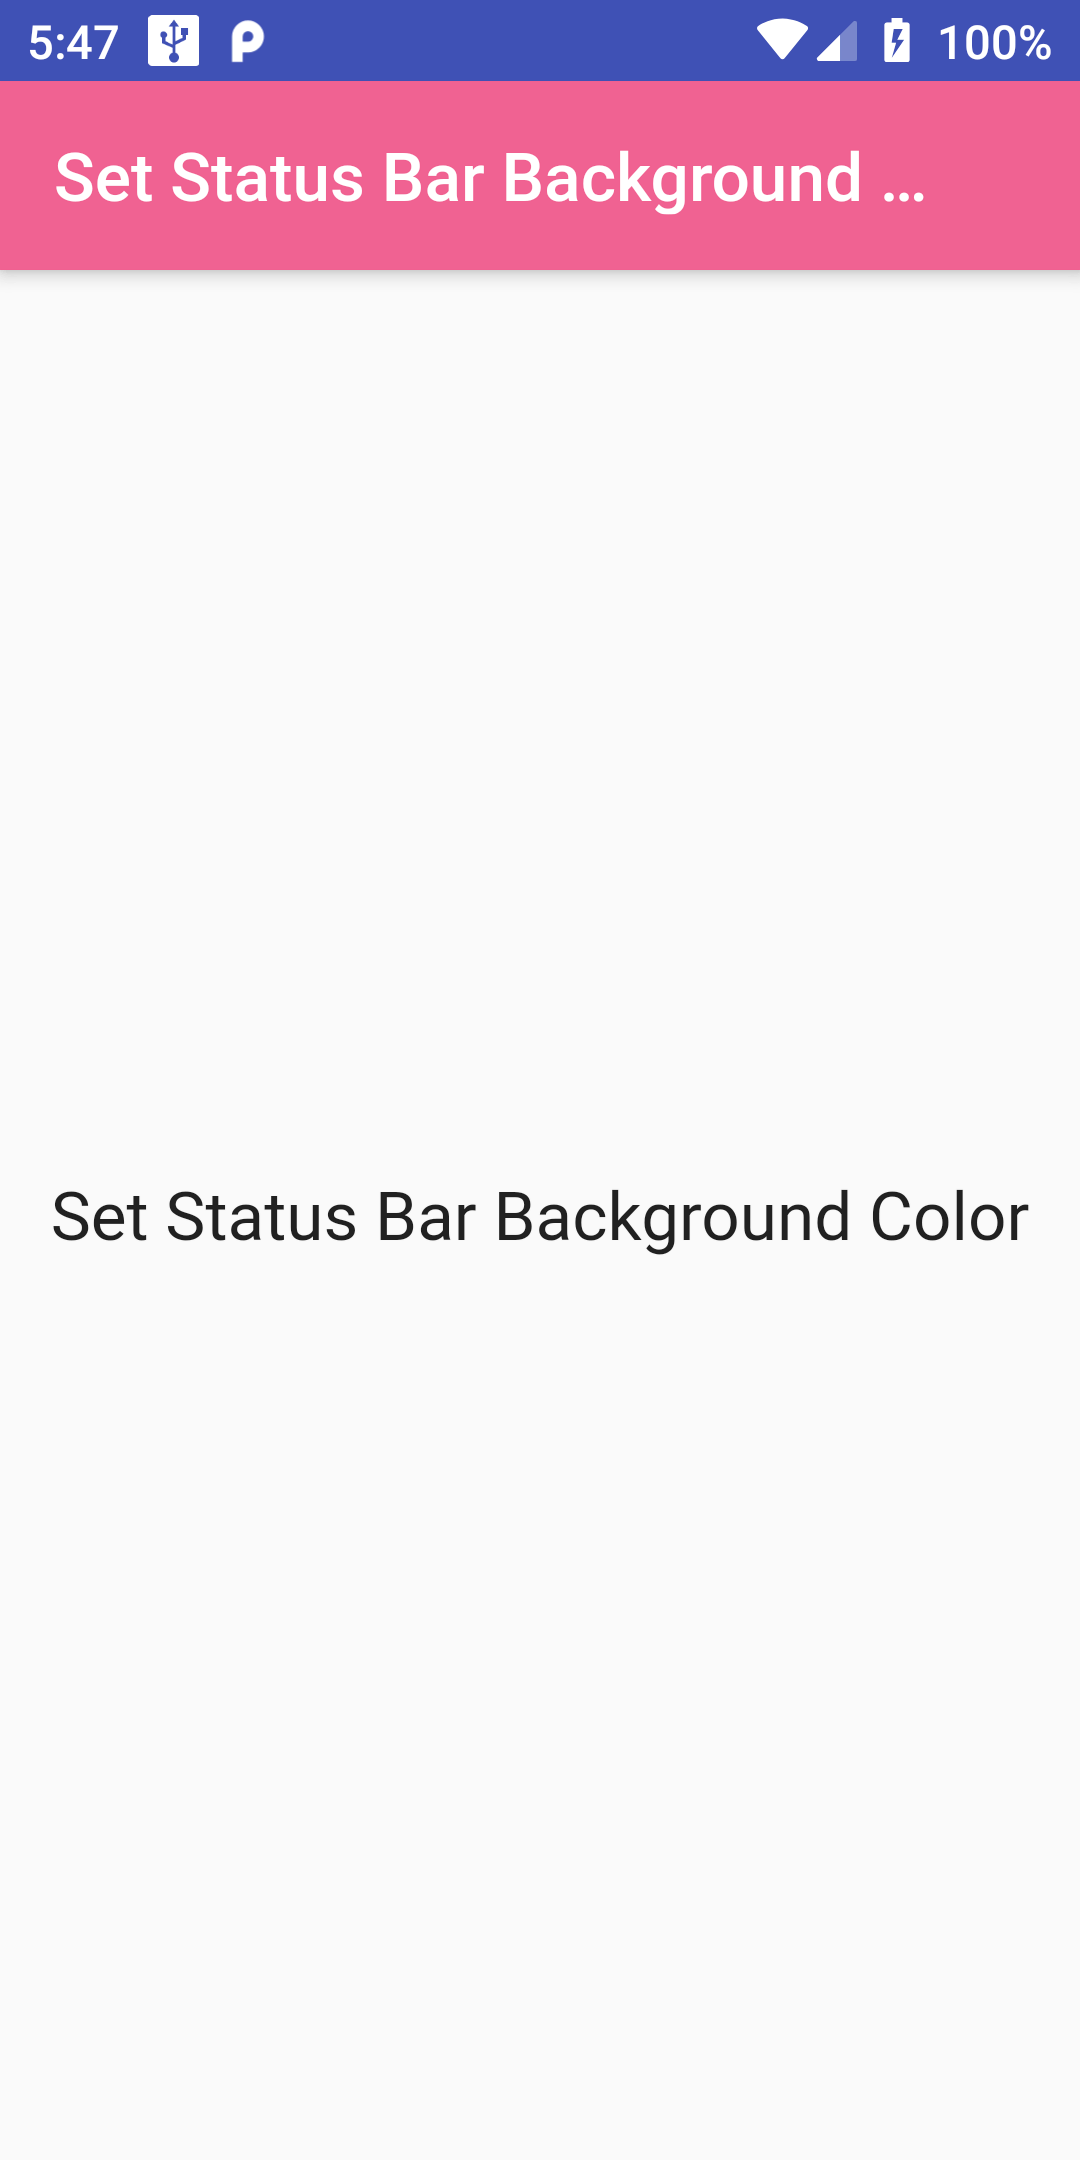 How To Change Status Bar Background Color In Flutter